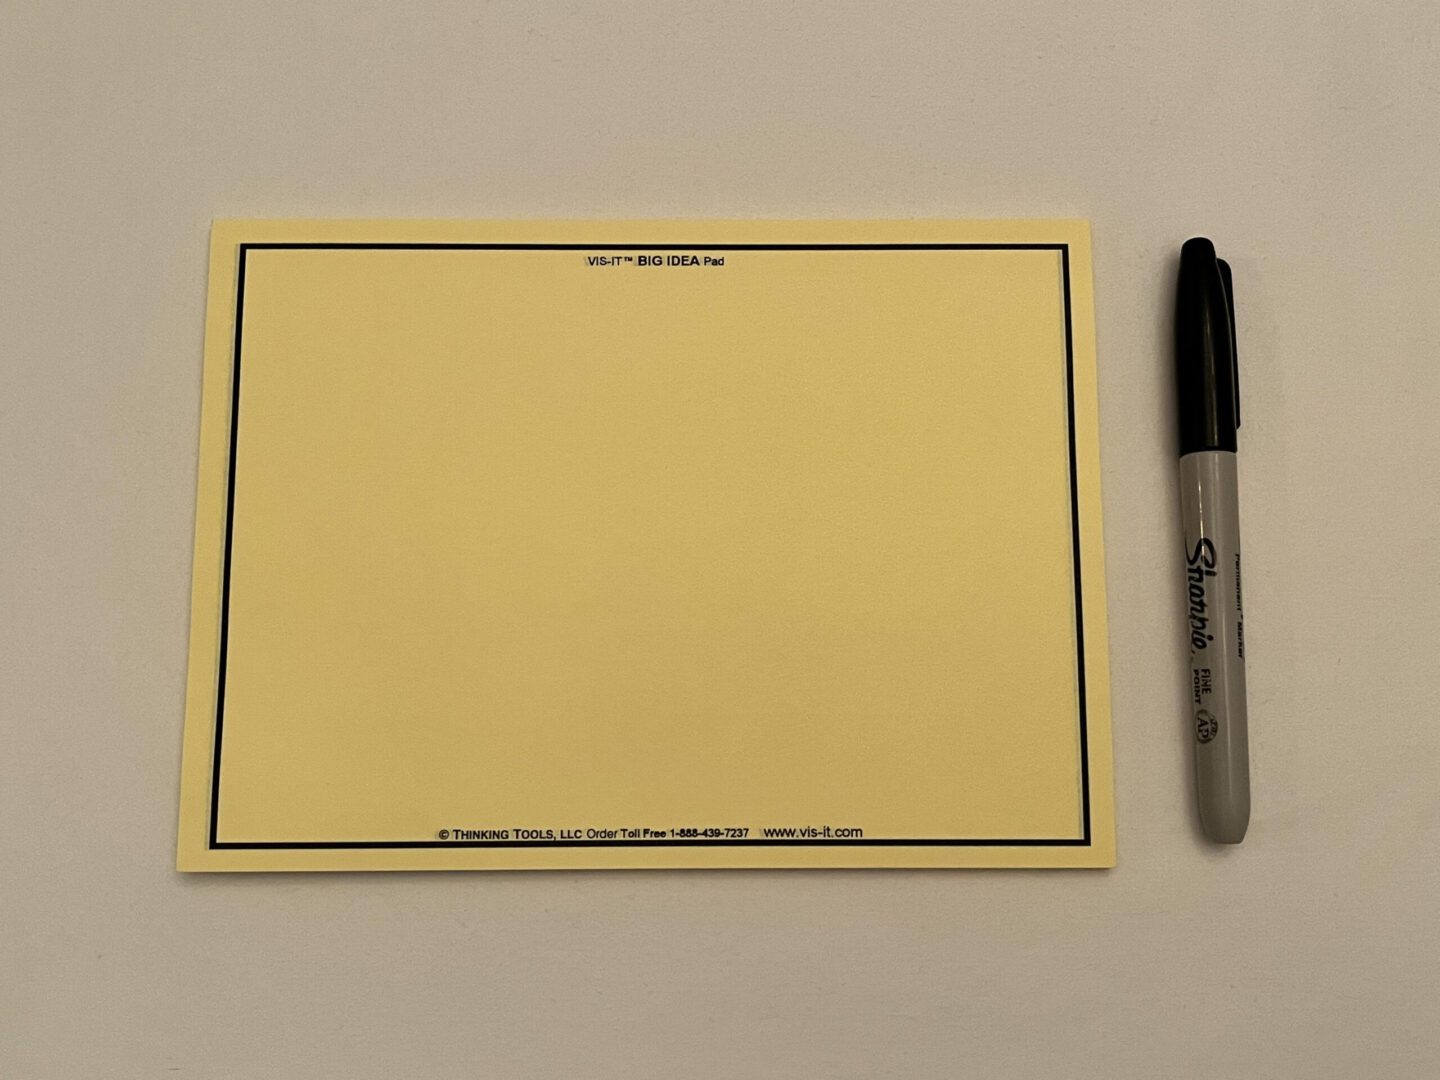 A YELLOW VIS-IT™ Big Idea Pad 8x6 in. (50 sheets) with a marker and a pen.